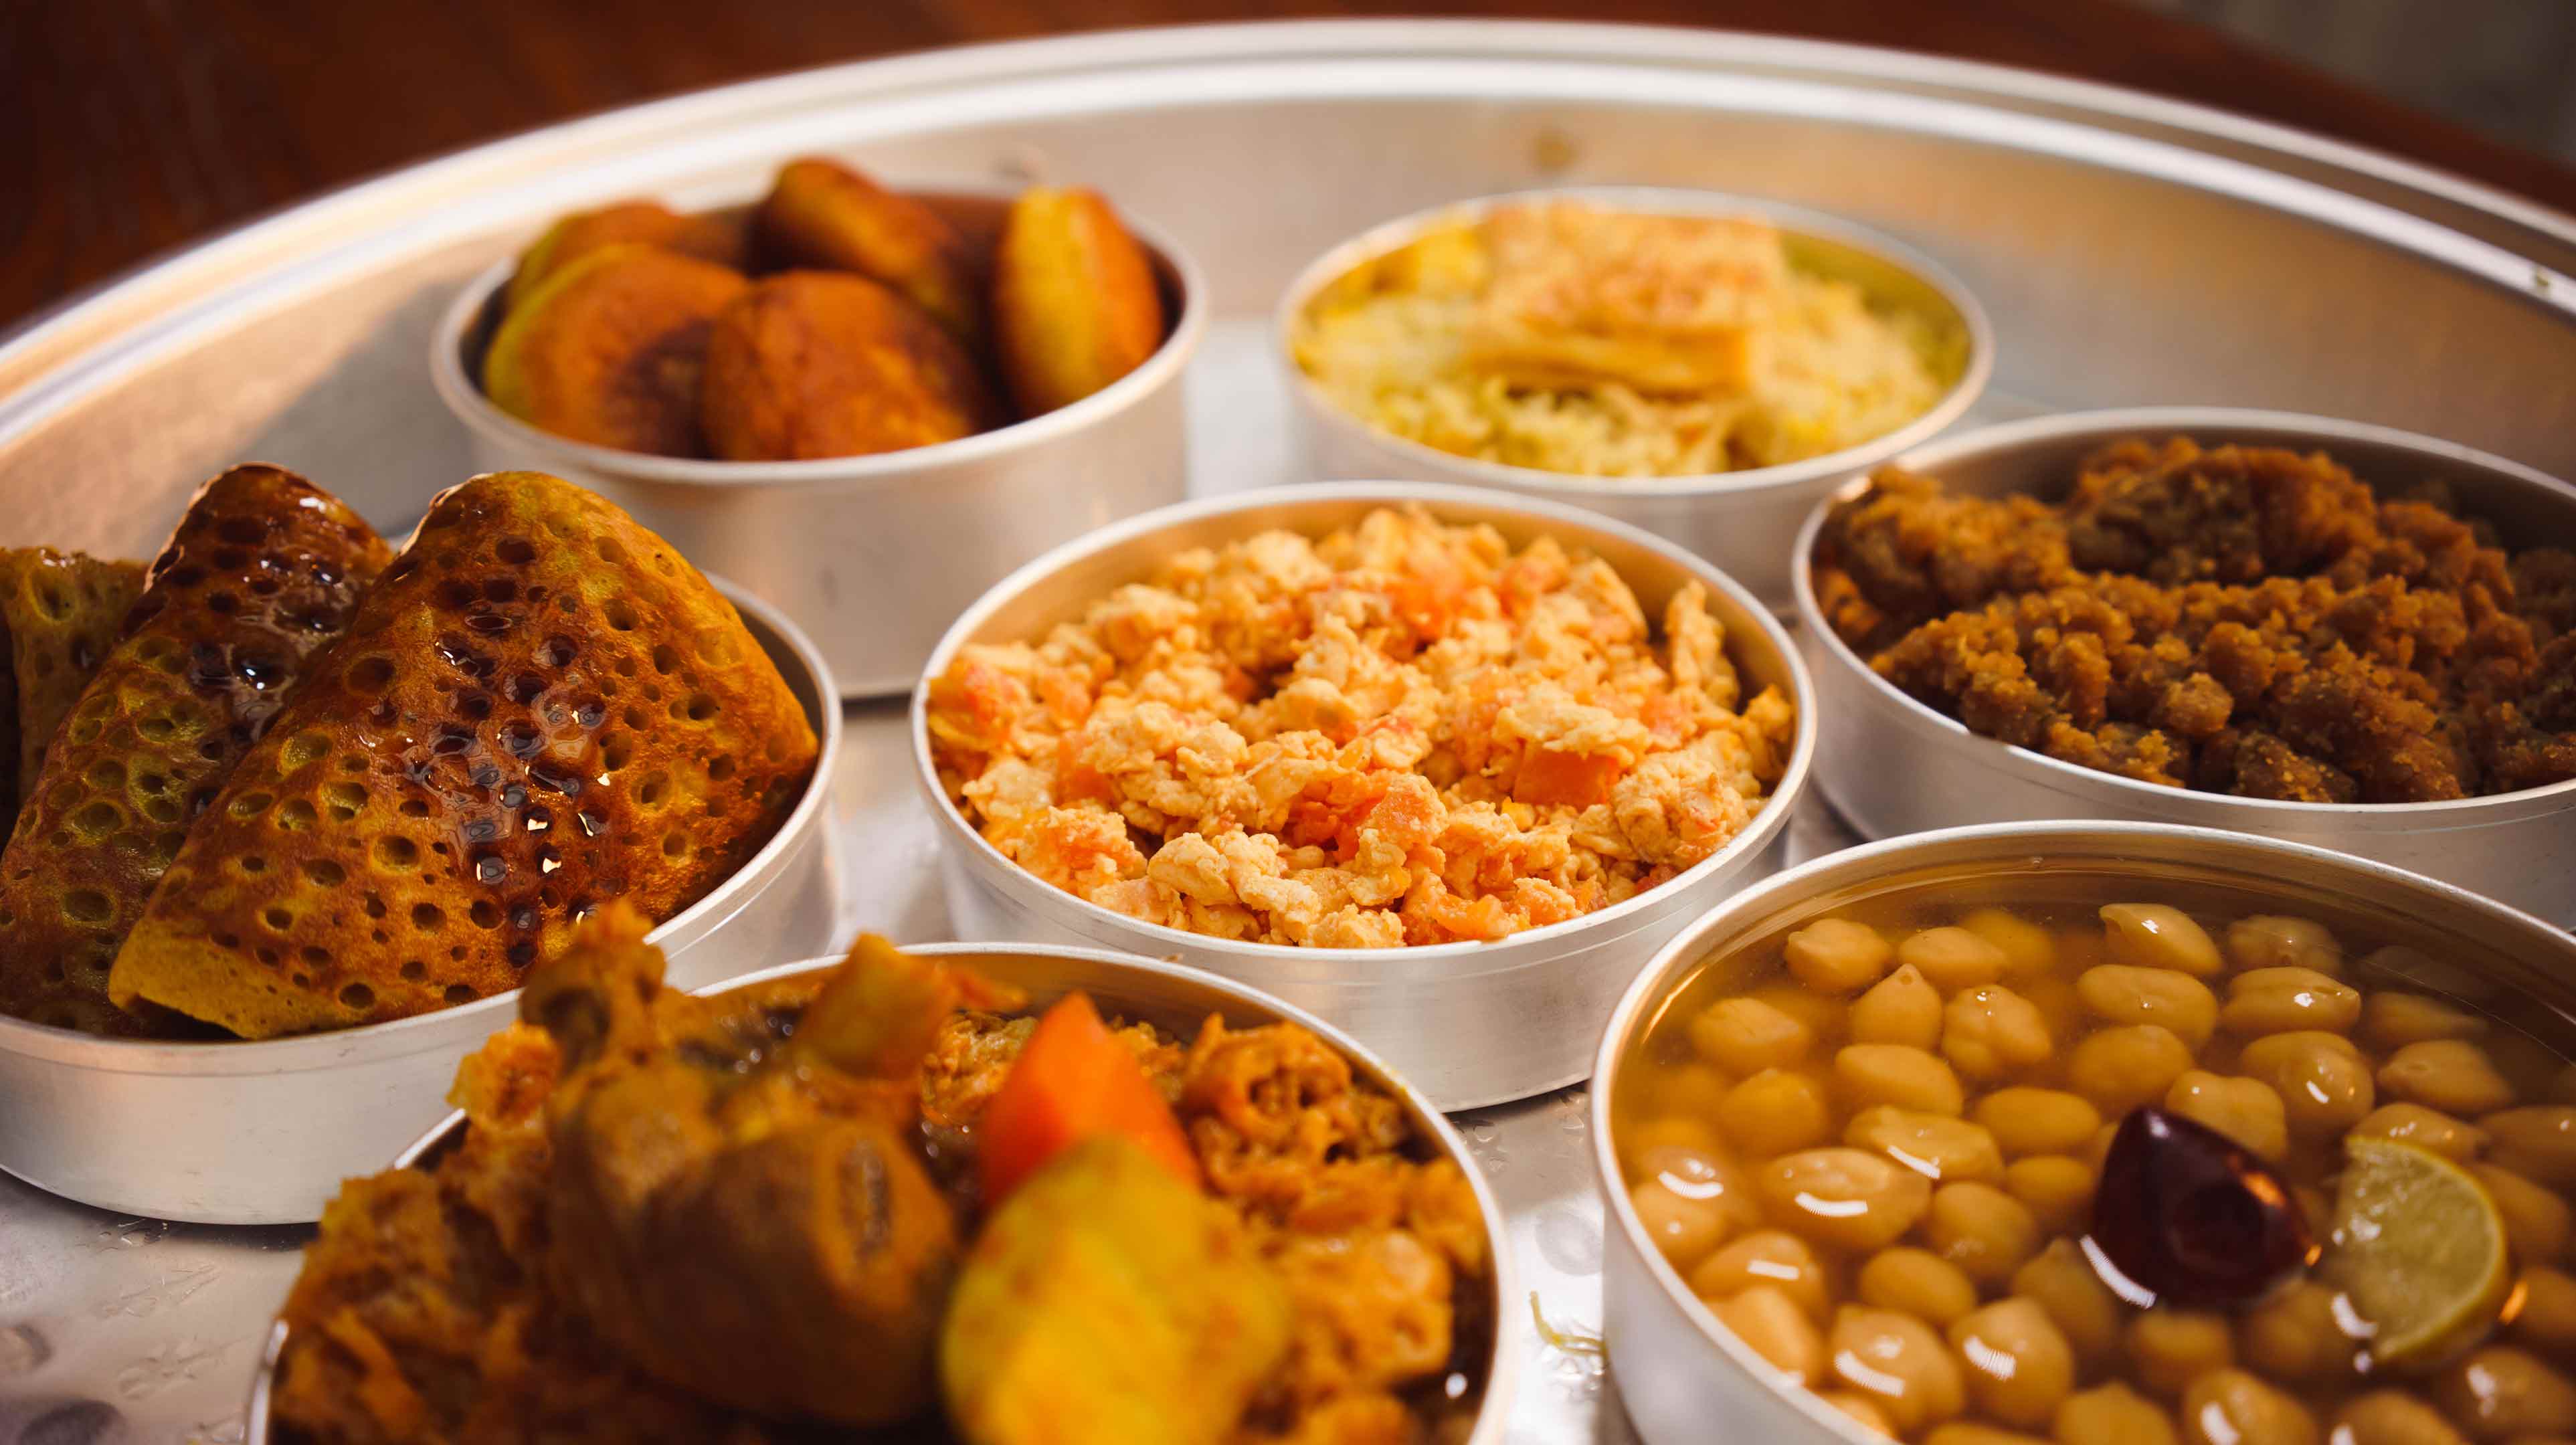 A traditional Emirati meal of seven different dishes